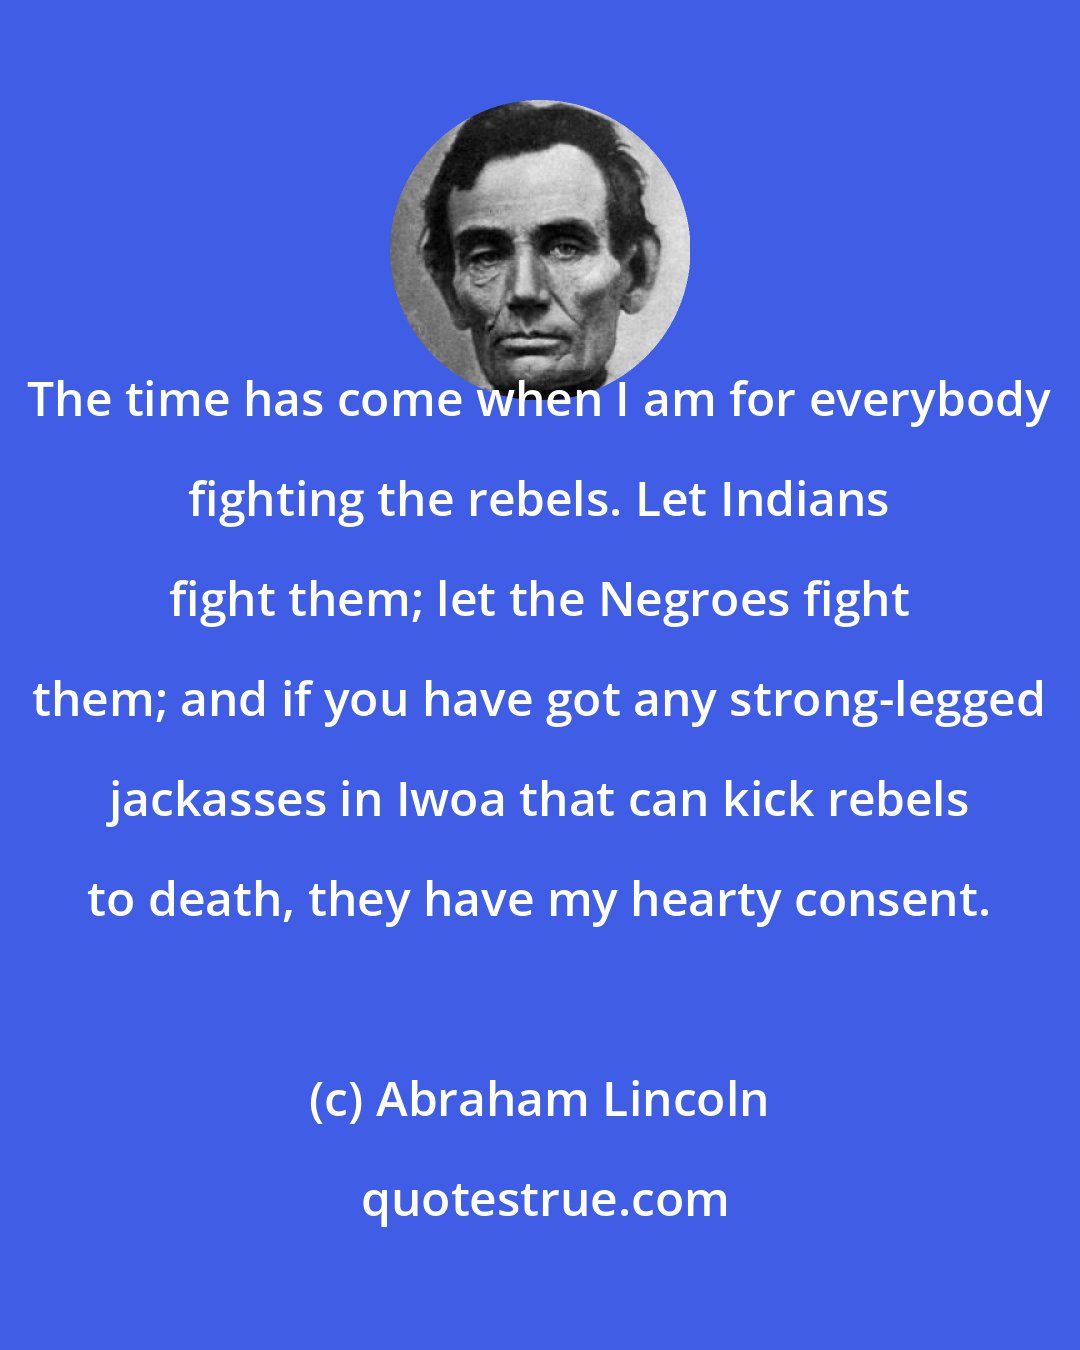 Abraham Lincoln: The time has come when I am for everybody fighting the rebels. Let Indians fight them; let the Negroes fight them; and if you have got any strong-legged jackasses in Iwoa that can kick rebels to death, they have my hearty consent.